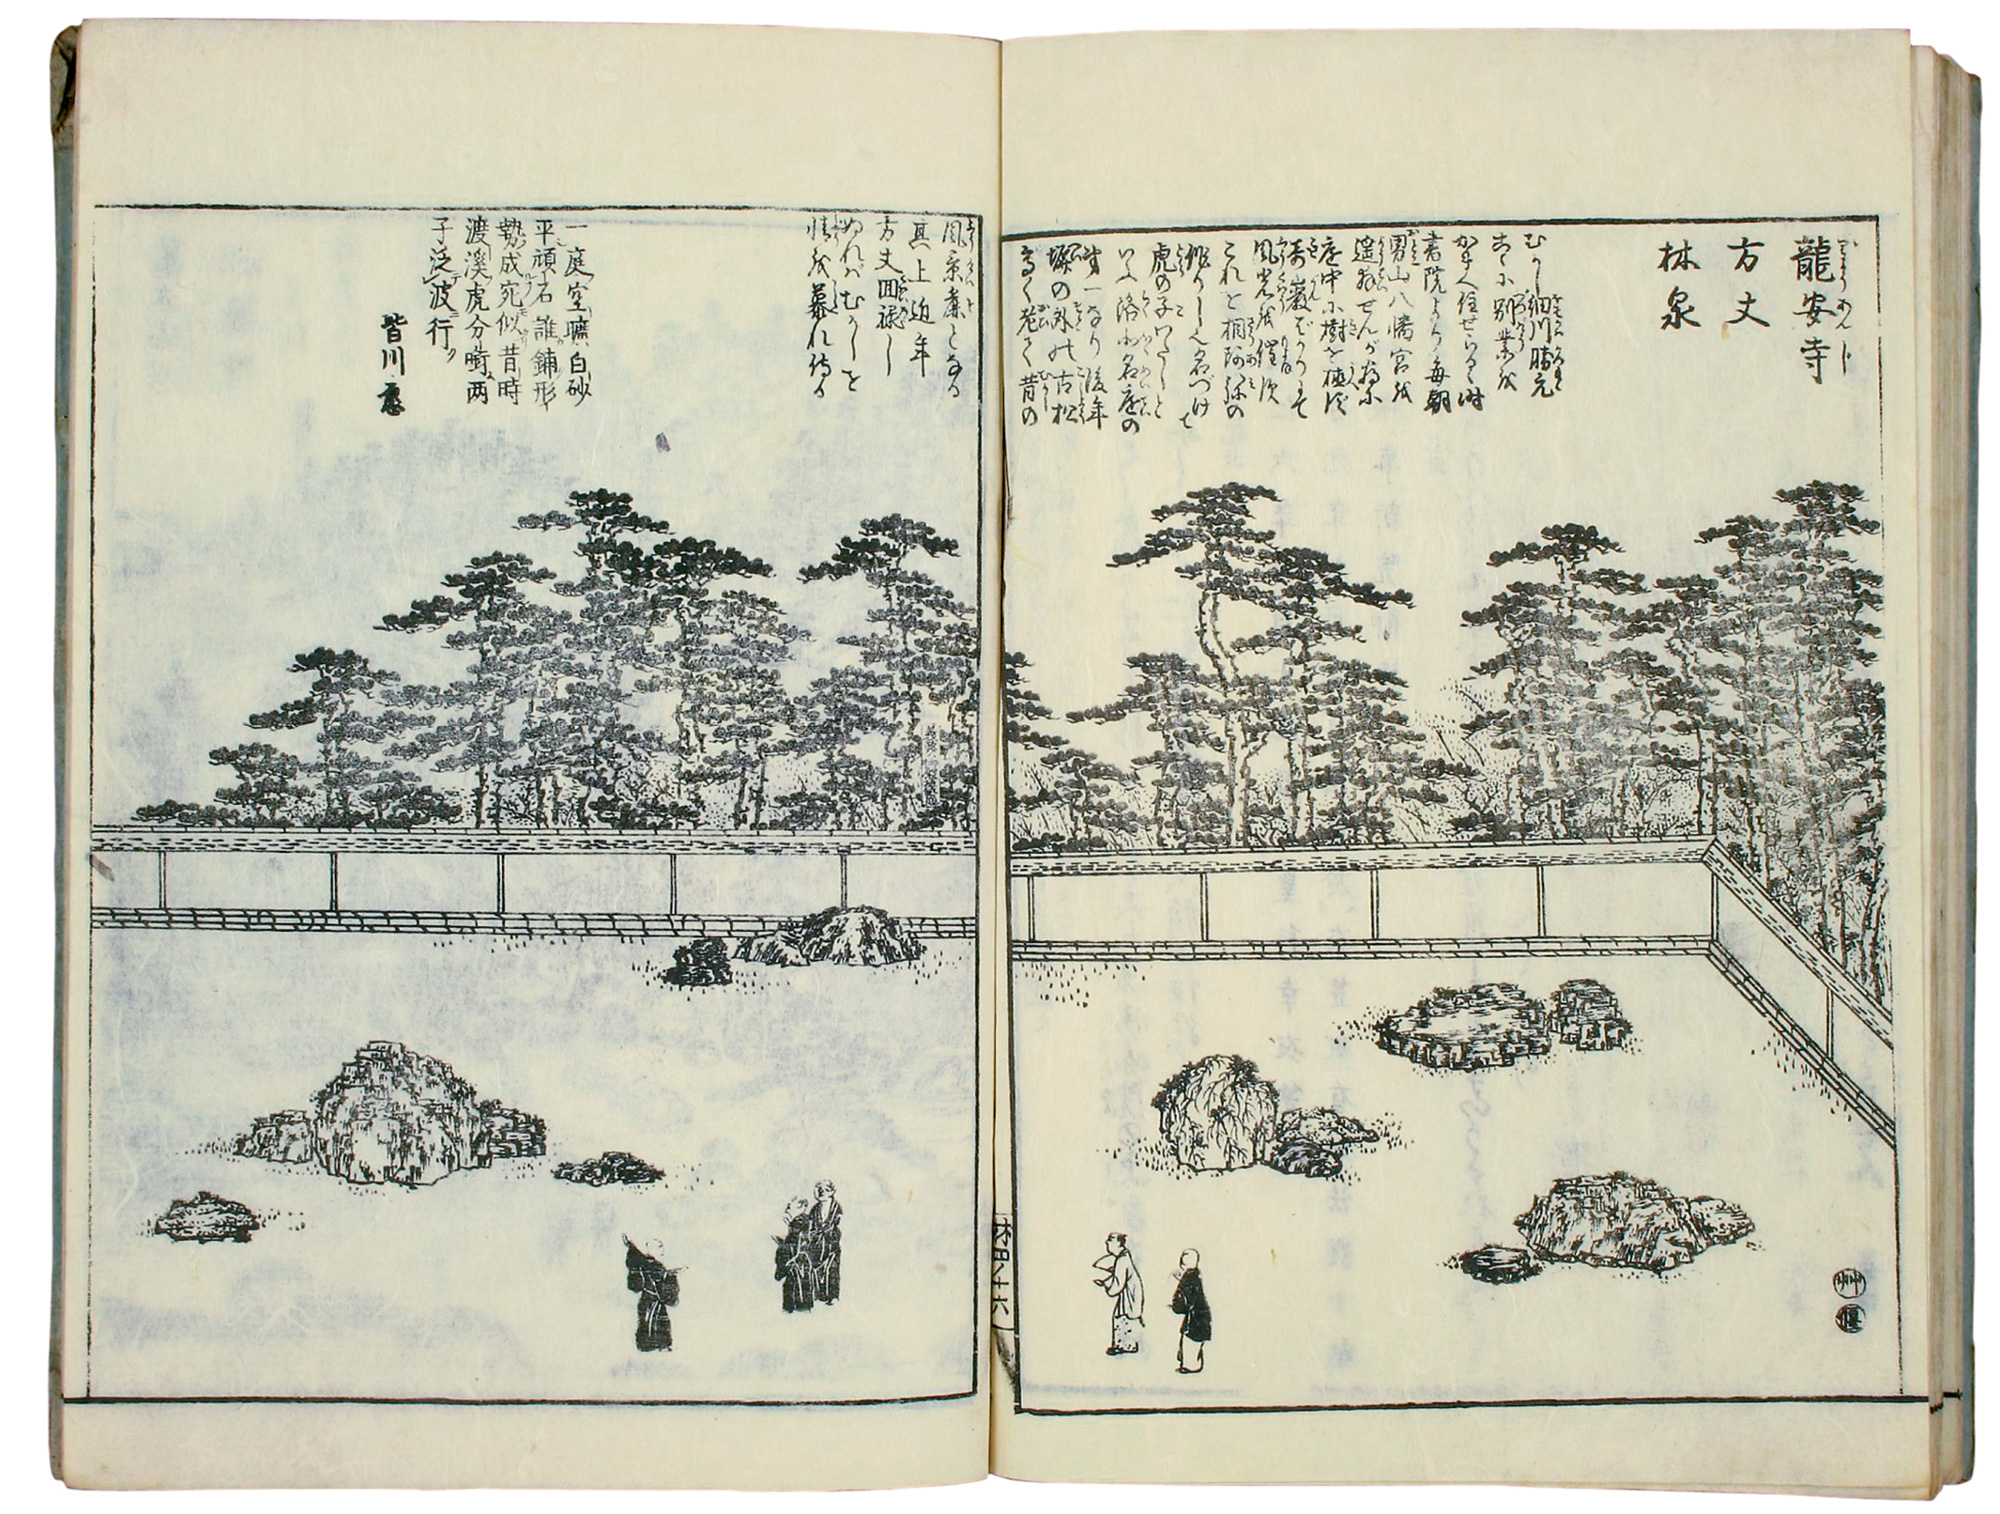 A seventeen ninety-nine illustration of Ryōan-ji from the “Illustrated Guide to Celebrated Gardens in the Capital.”